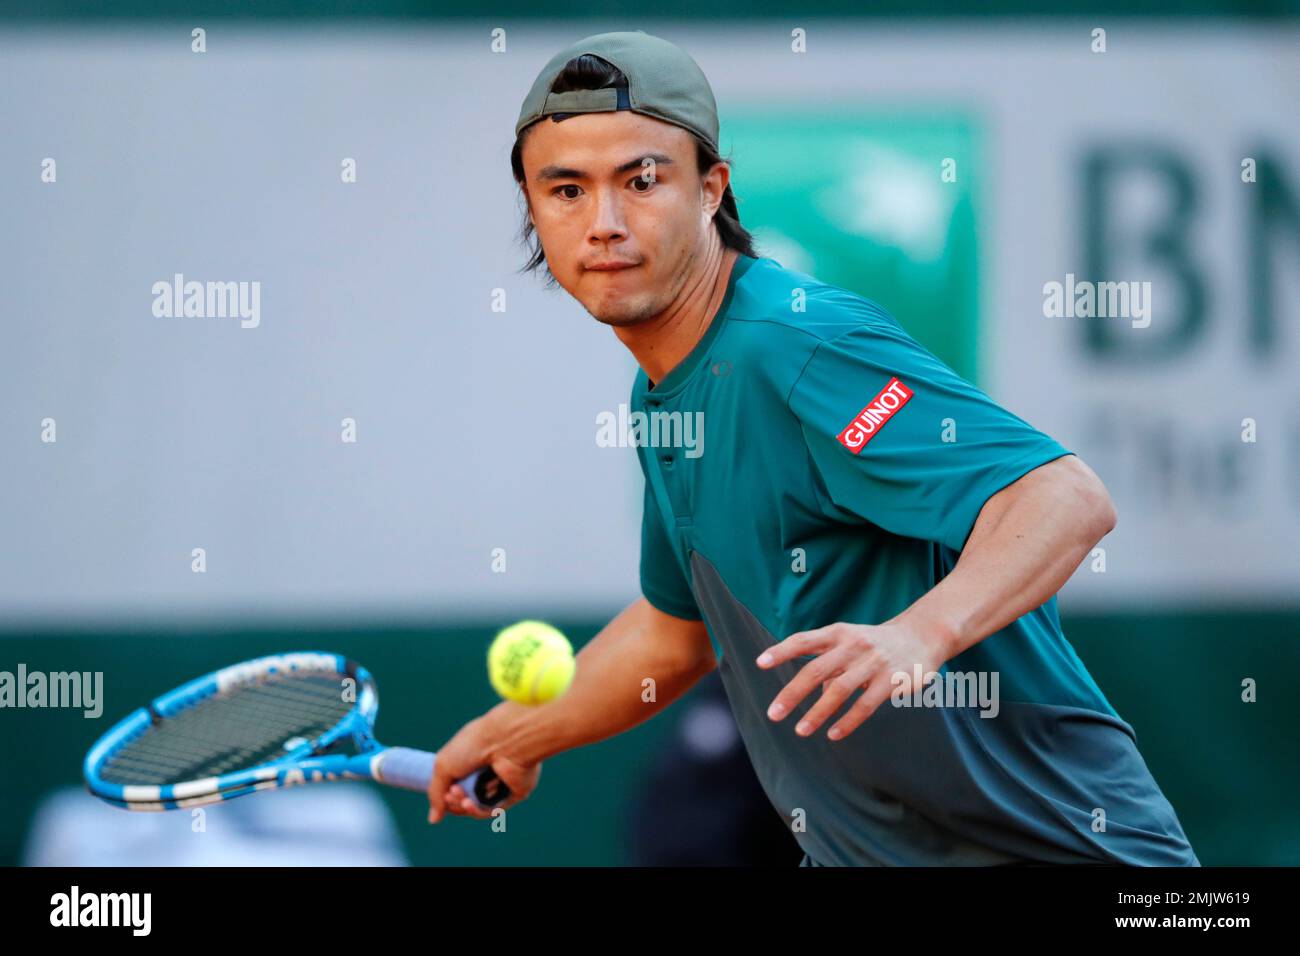 Japan's Taro Daniel plays a shot against France's Gael Monfils during their  first round match of the French Open tennis tournament at the Roland Garros  stadium in Paris, Tuesday, May 28, 2019. (